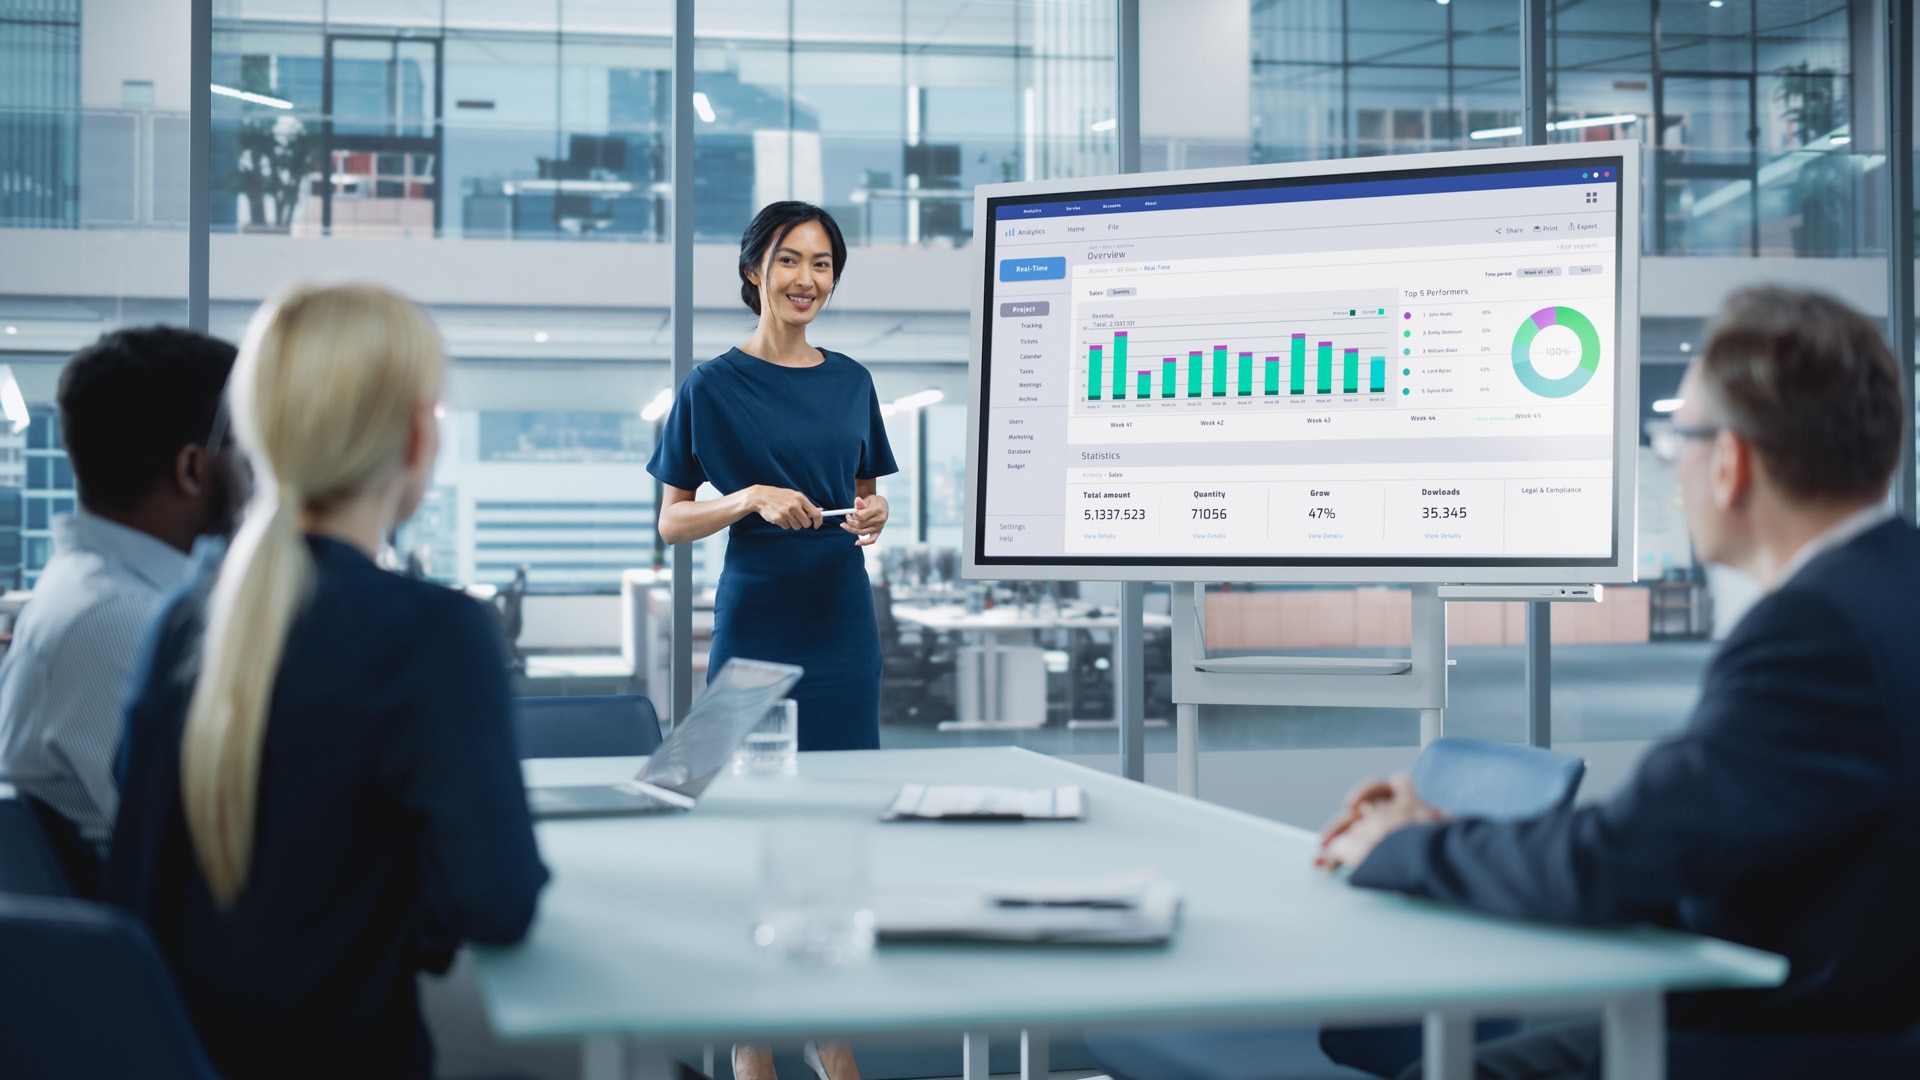 Female Operations Manager Holds Meeting Presentation for a Team of Economists. Asian Woman Uses Digital Whiteboard with Growth Analysis, Charts, Statistics and Data. People Work in Business Office.; Shutterstock ID 2109008447; purchase_order: -; job: -; client: -; other: -